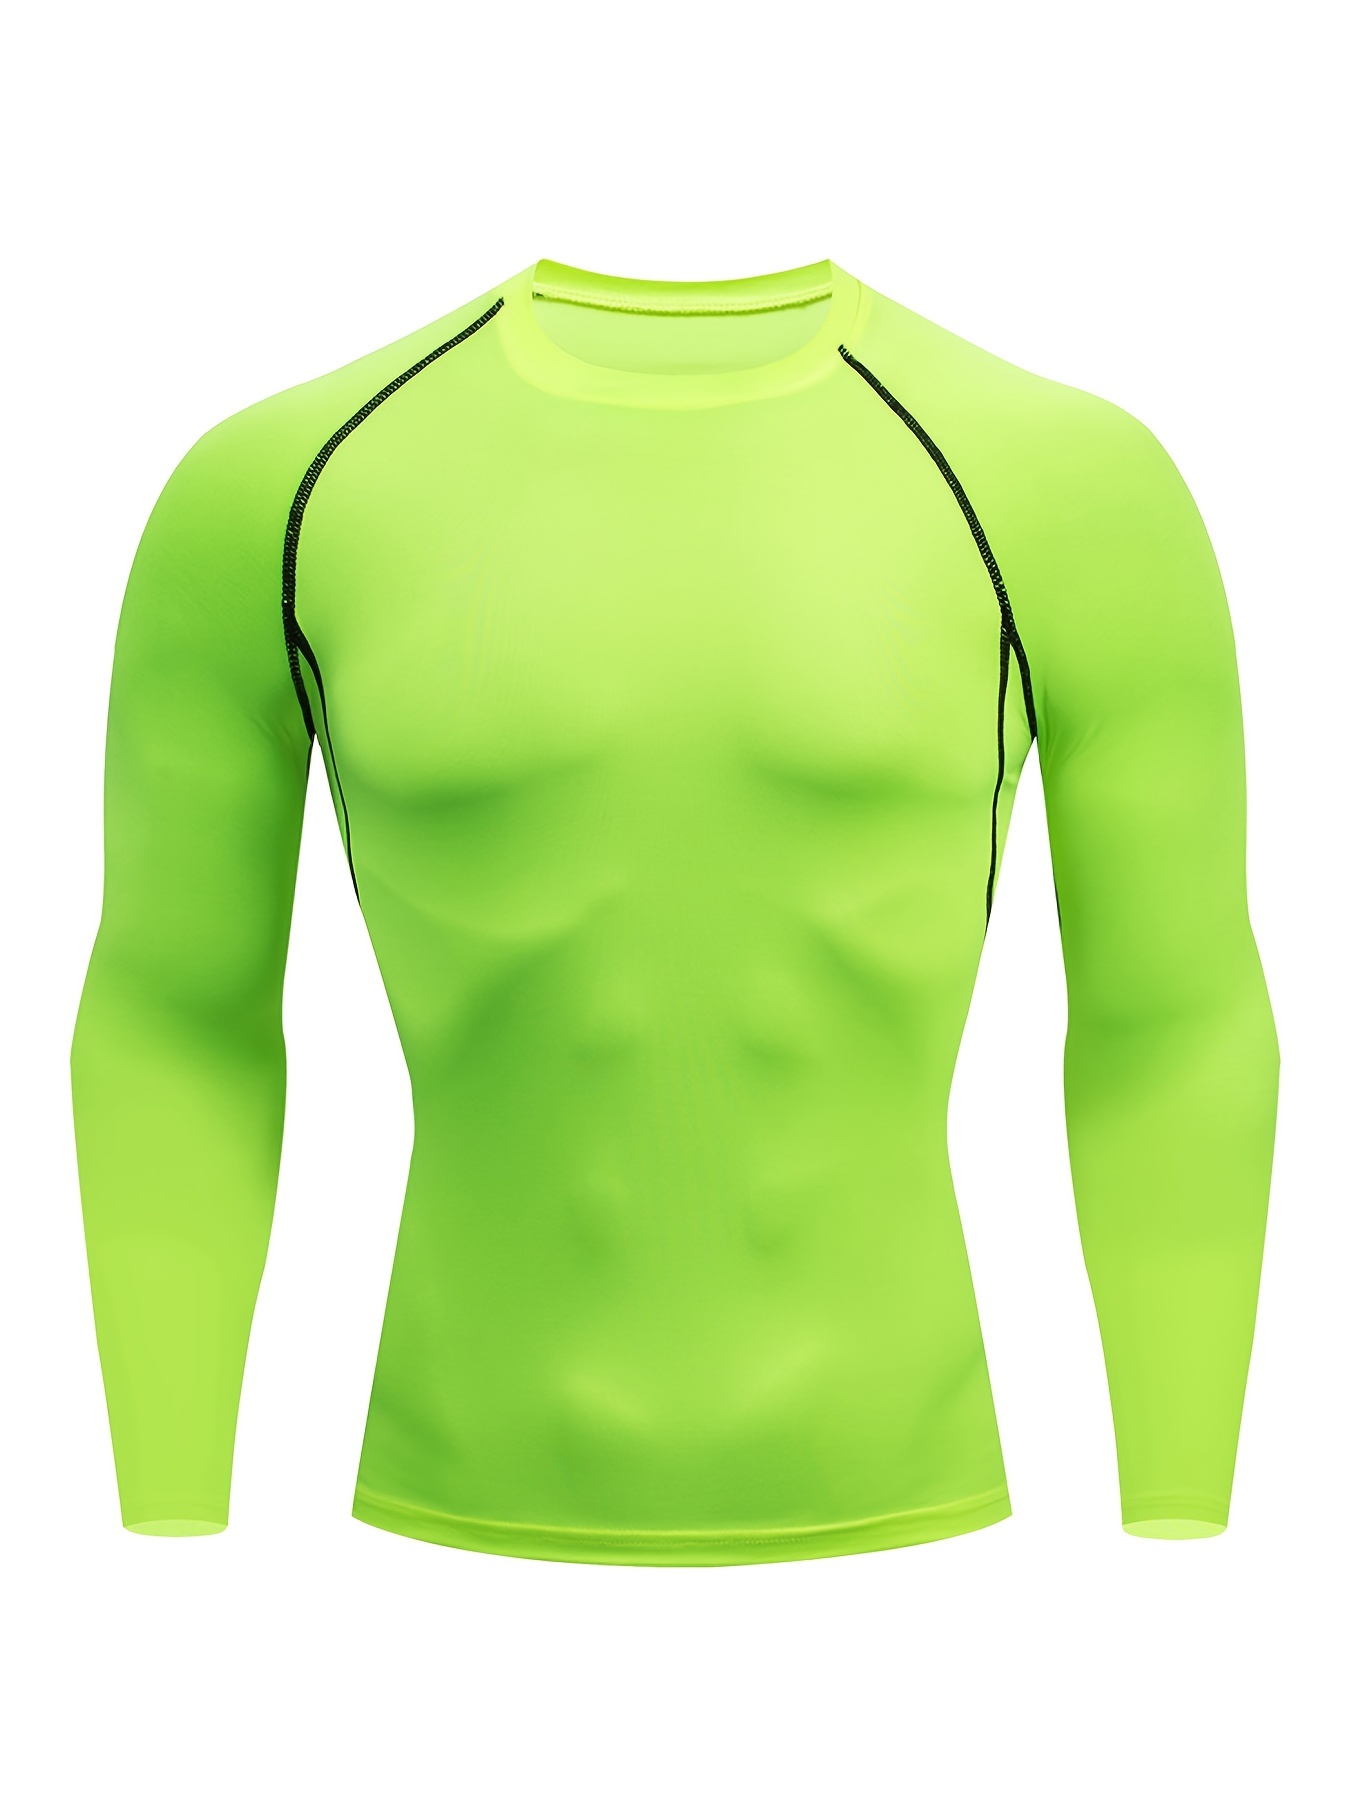 DRSKIN Men's Compression Shirts Top Long Sleeve Sports Running